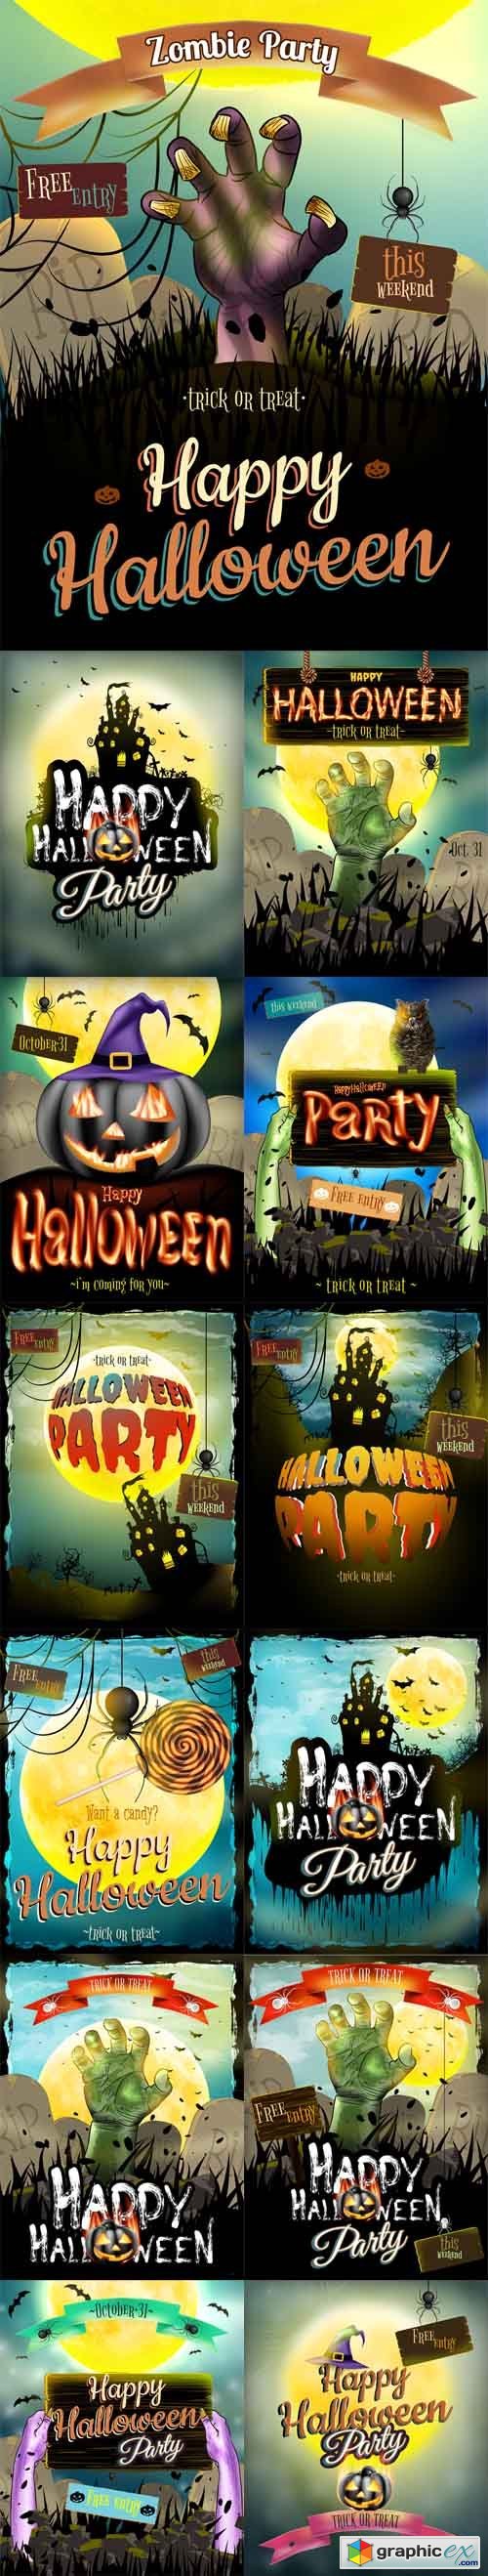 Halloween Posters for Holiday